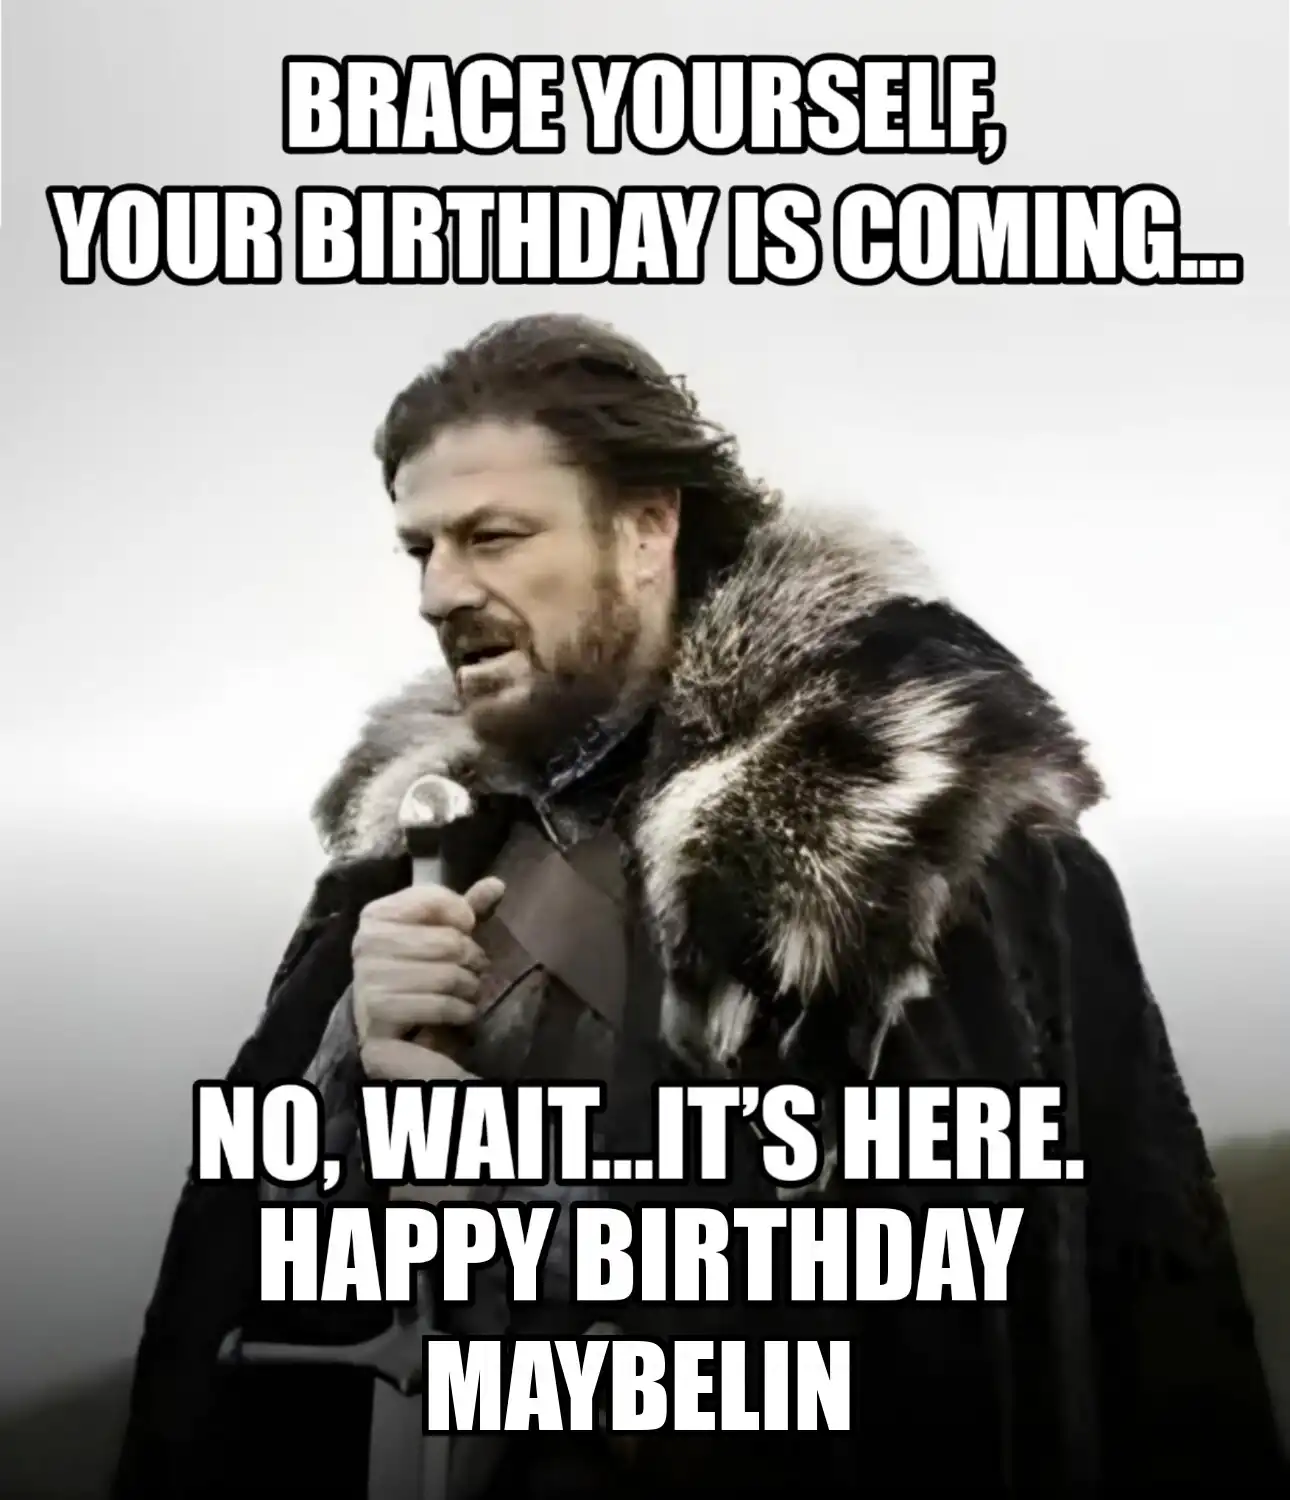 Happy Birthday Maybelin Brace Yourself Your Birthday Is Coming Meme